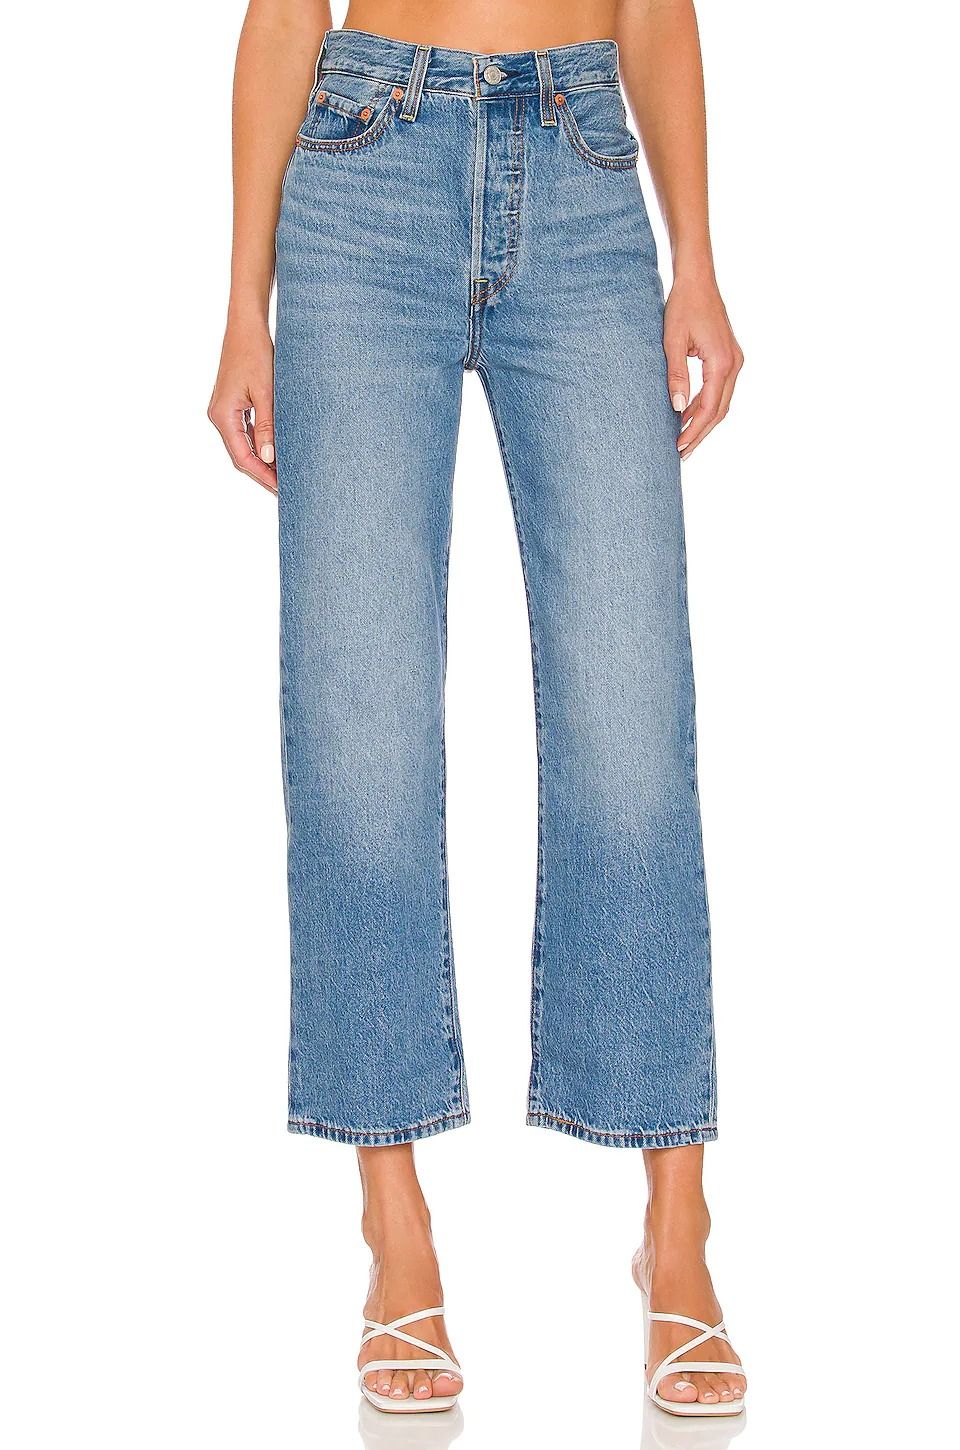 The 19 Best Jeans for Women Over 50 | Who What Wear